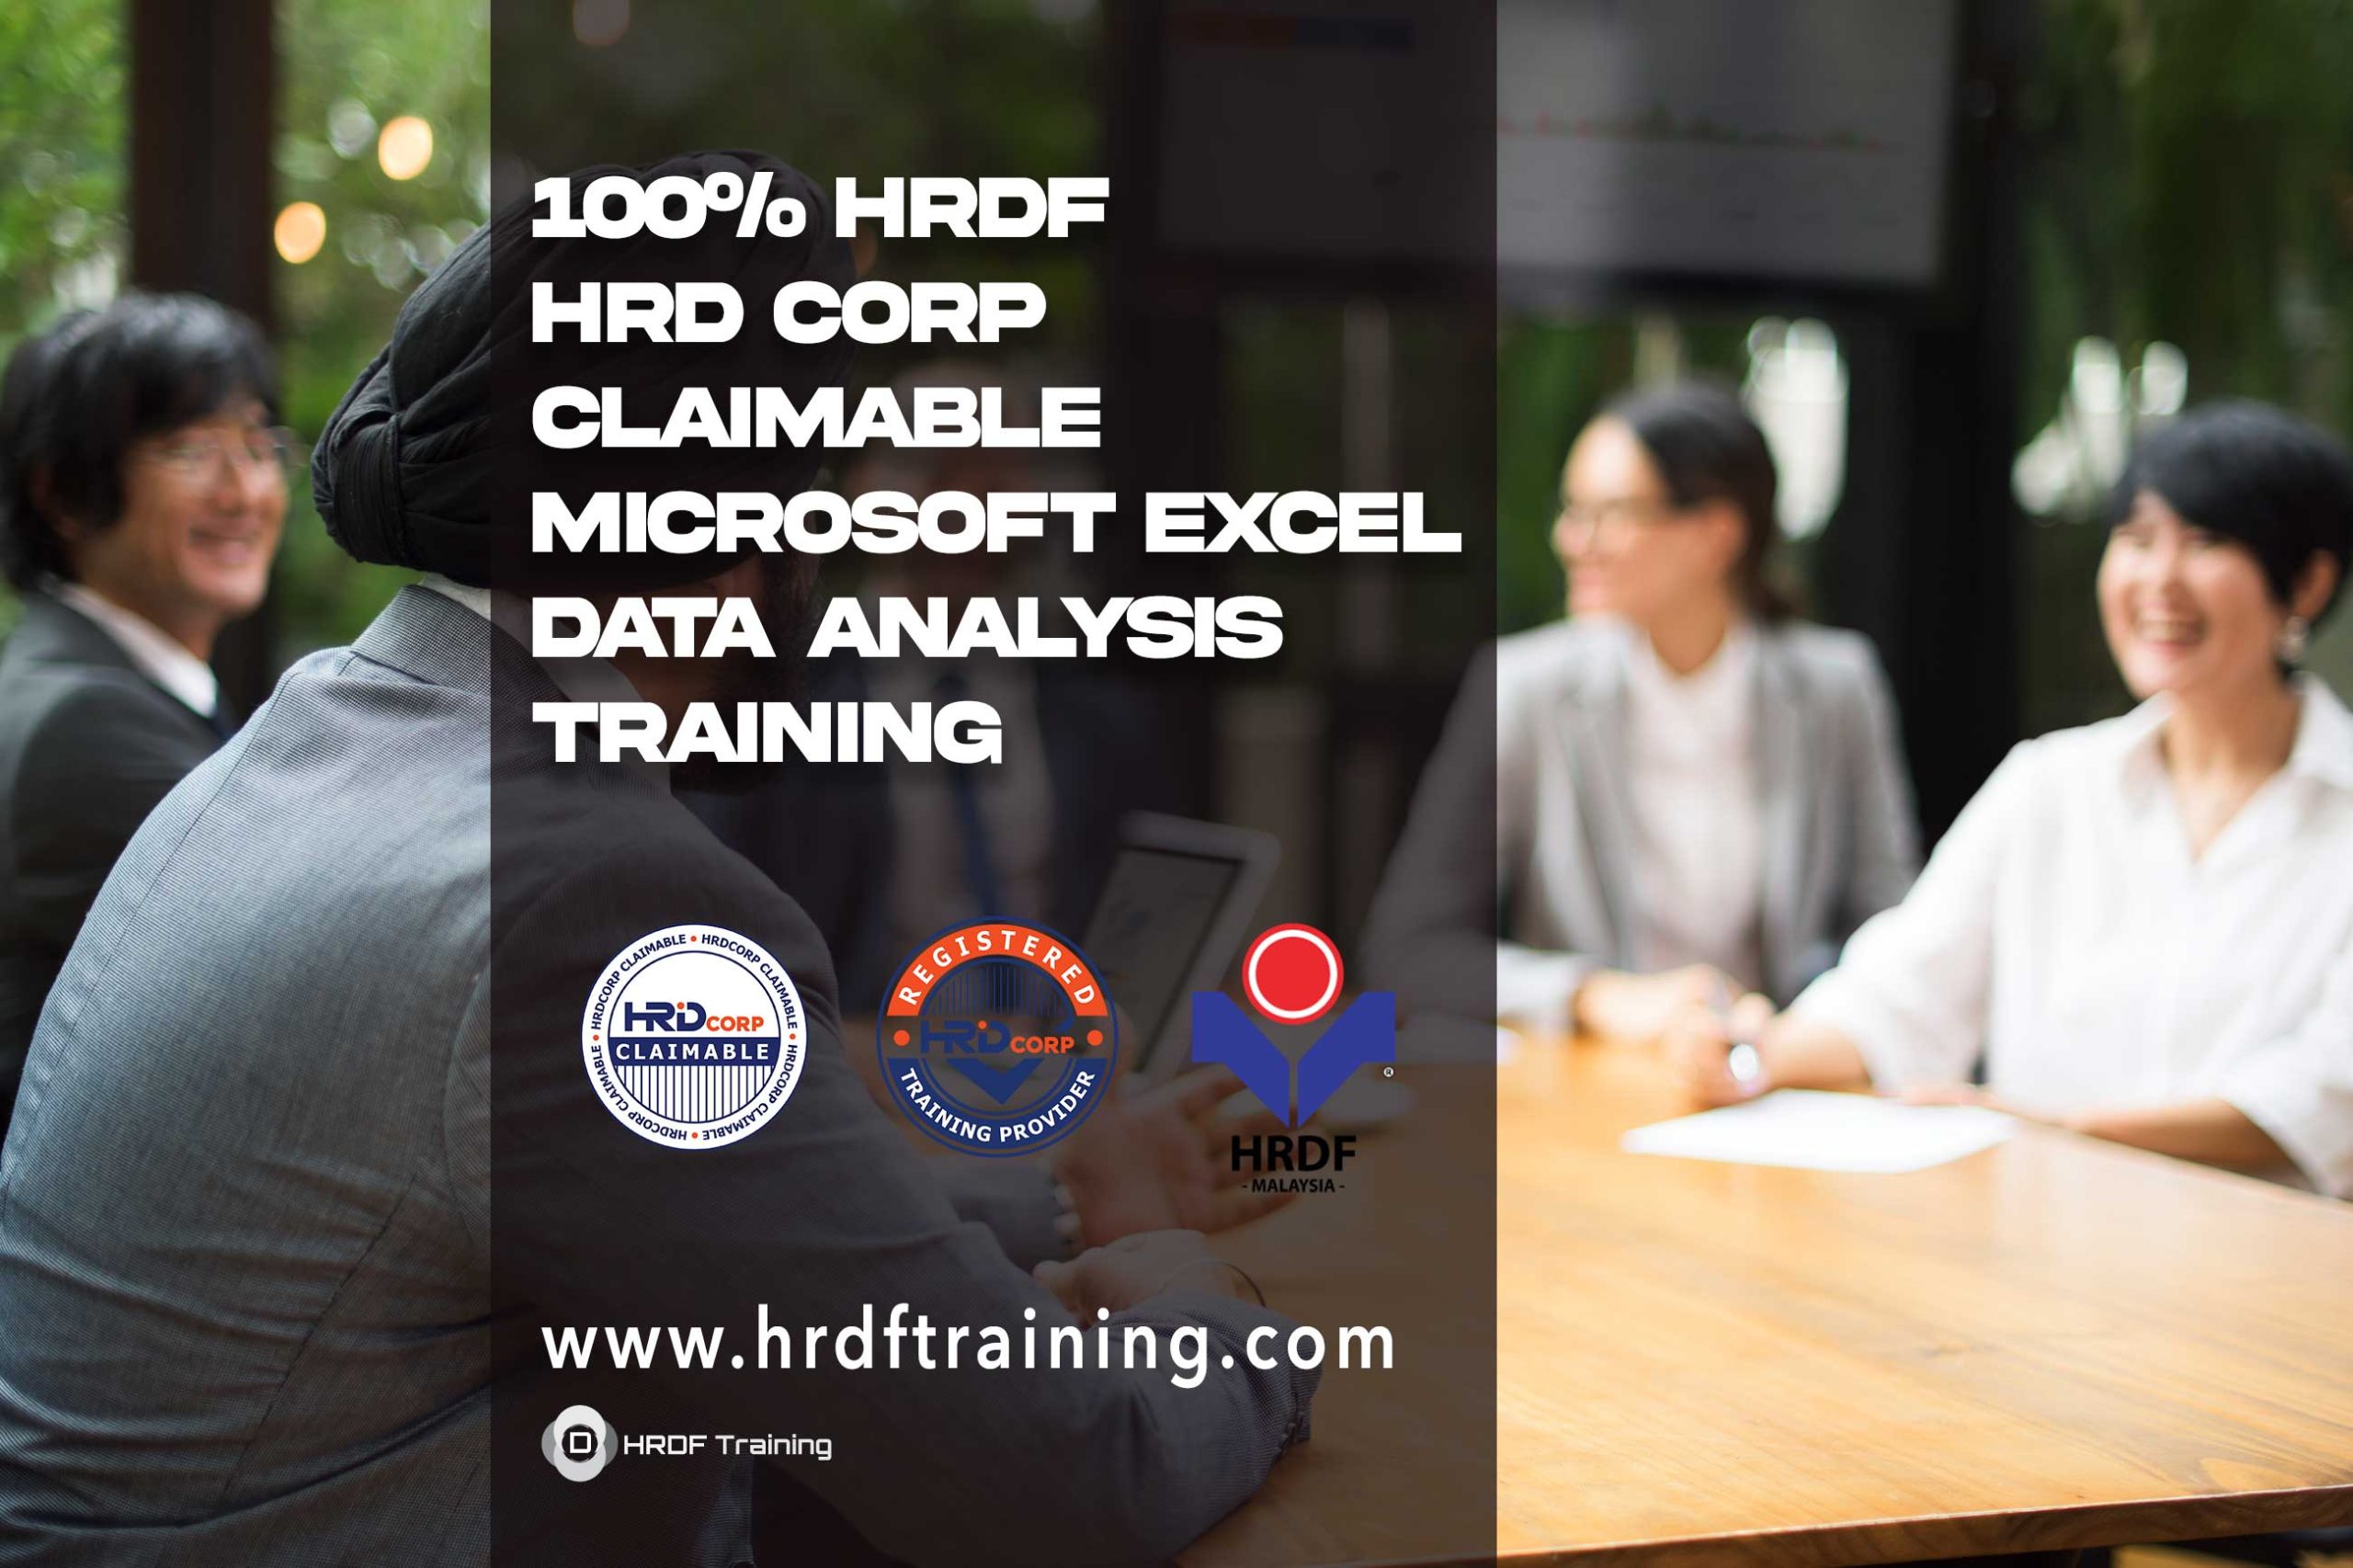 HRDF-HRD-Corp-Claimable-Microsoft-Excel-Data-Analysis-Training